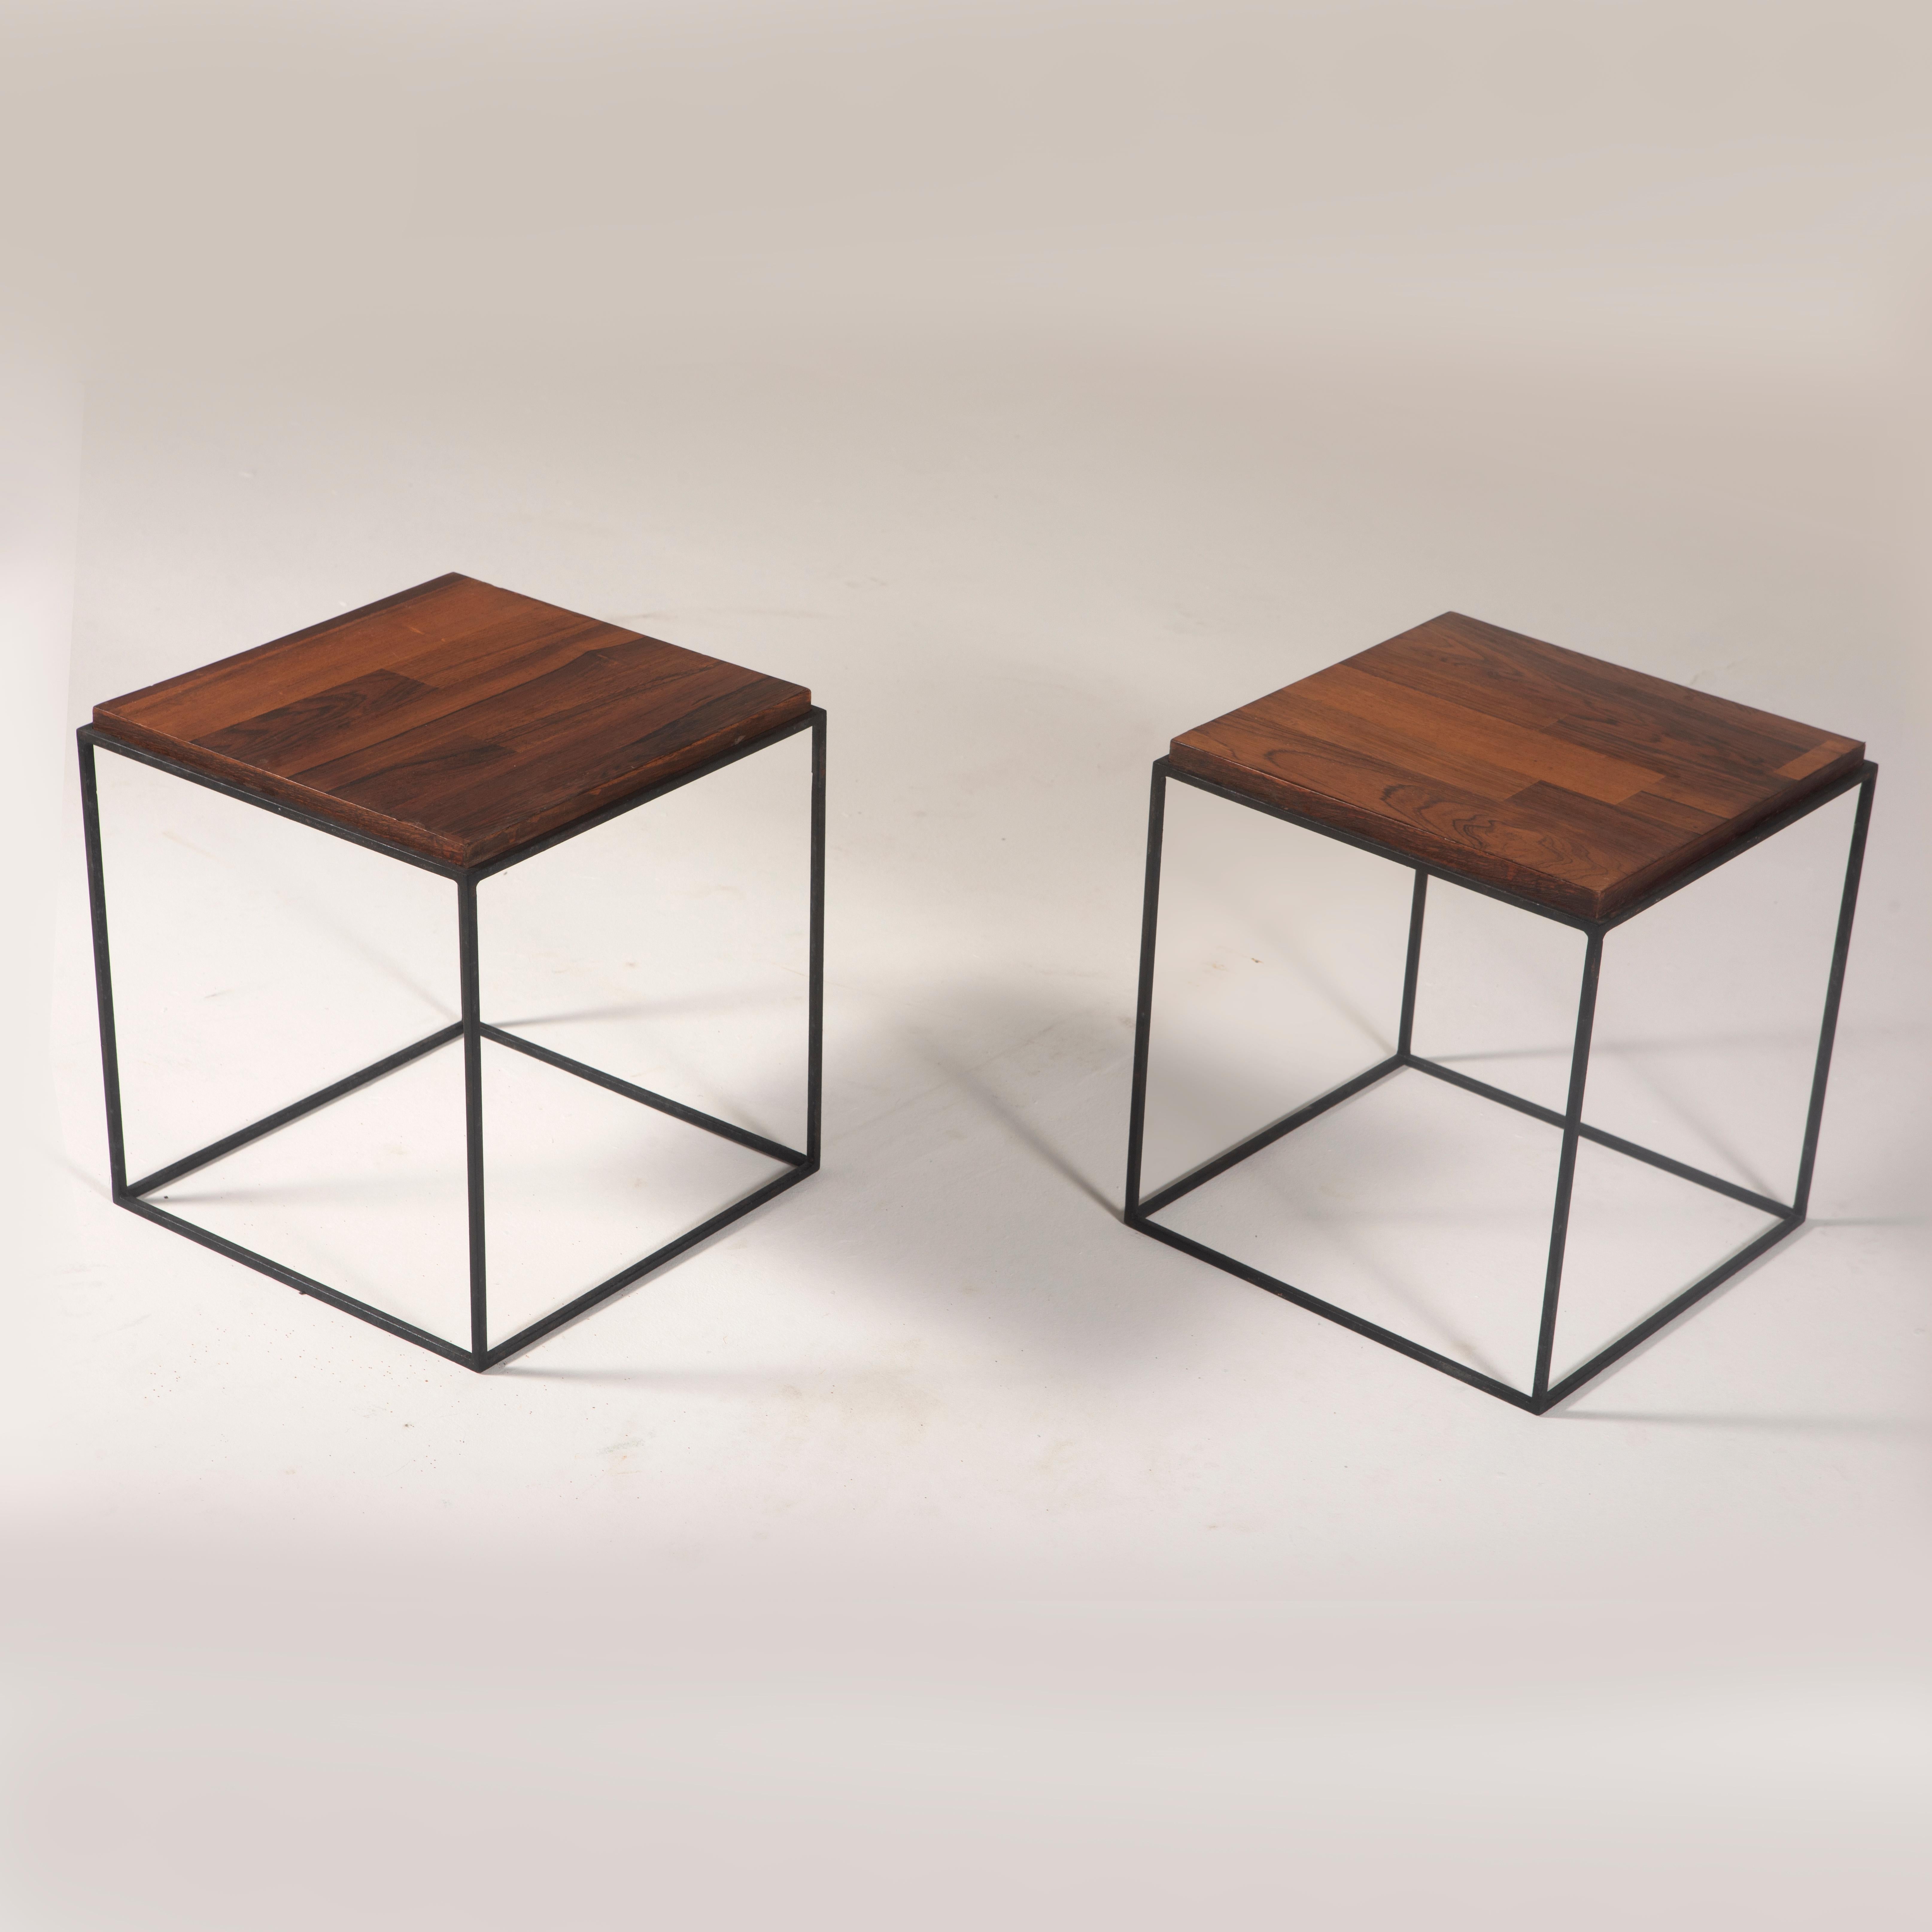 Pair of Side Tables by Brazilian Designer, 1960s

The tables feature sturdy metal structures that provide a stable foundation, topped with veneer wood. 
The wood grain adds a natural touch, enhancing the overall aesthetic of the pieces.

These side